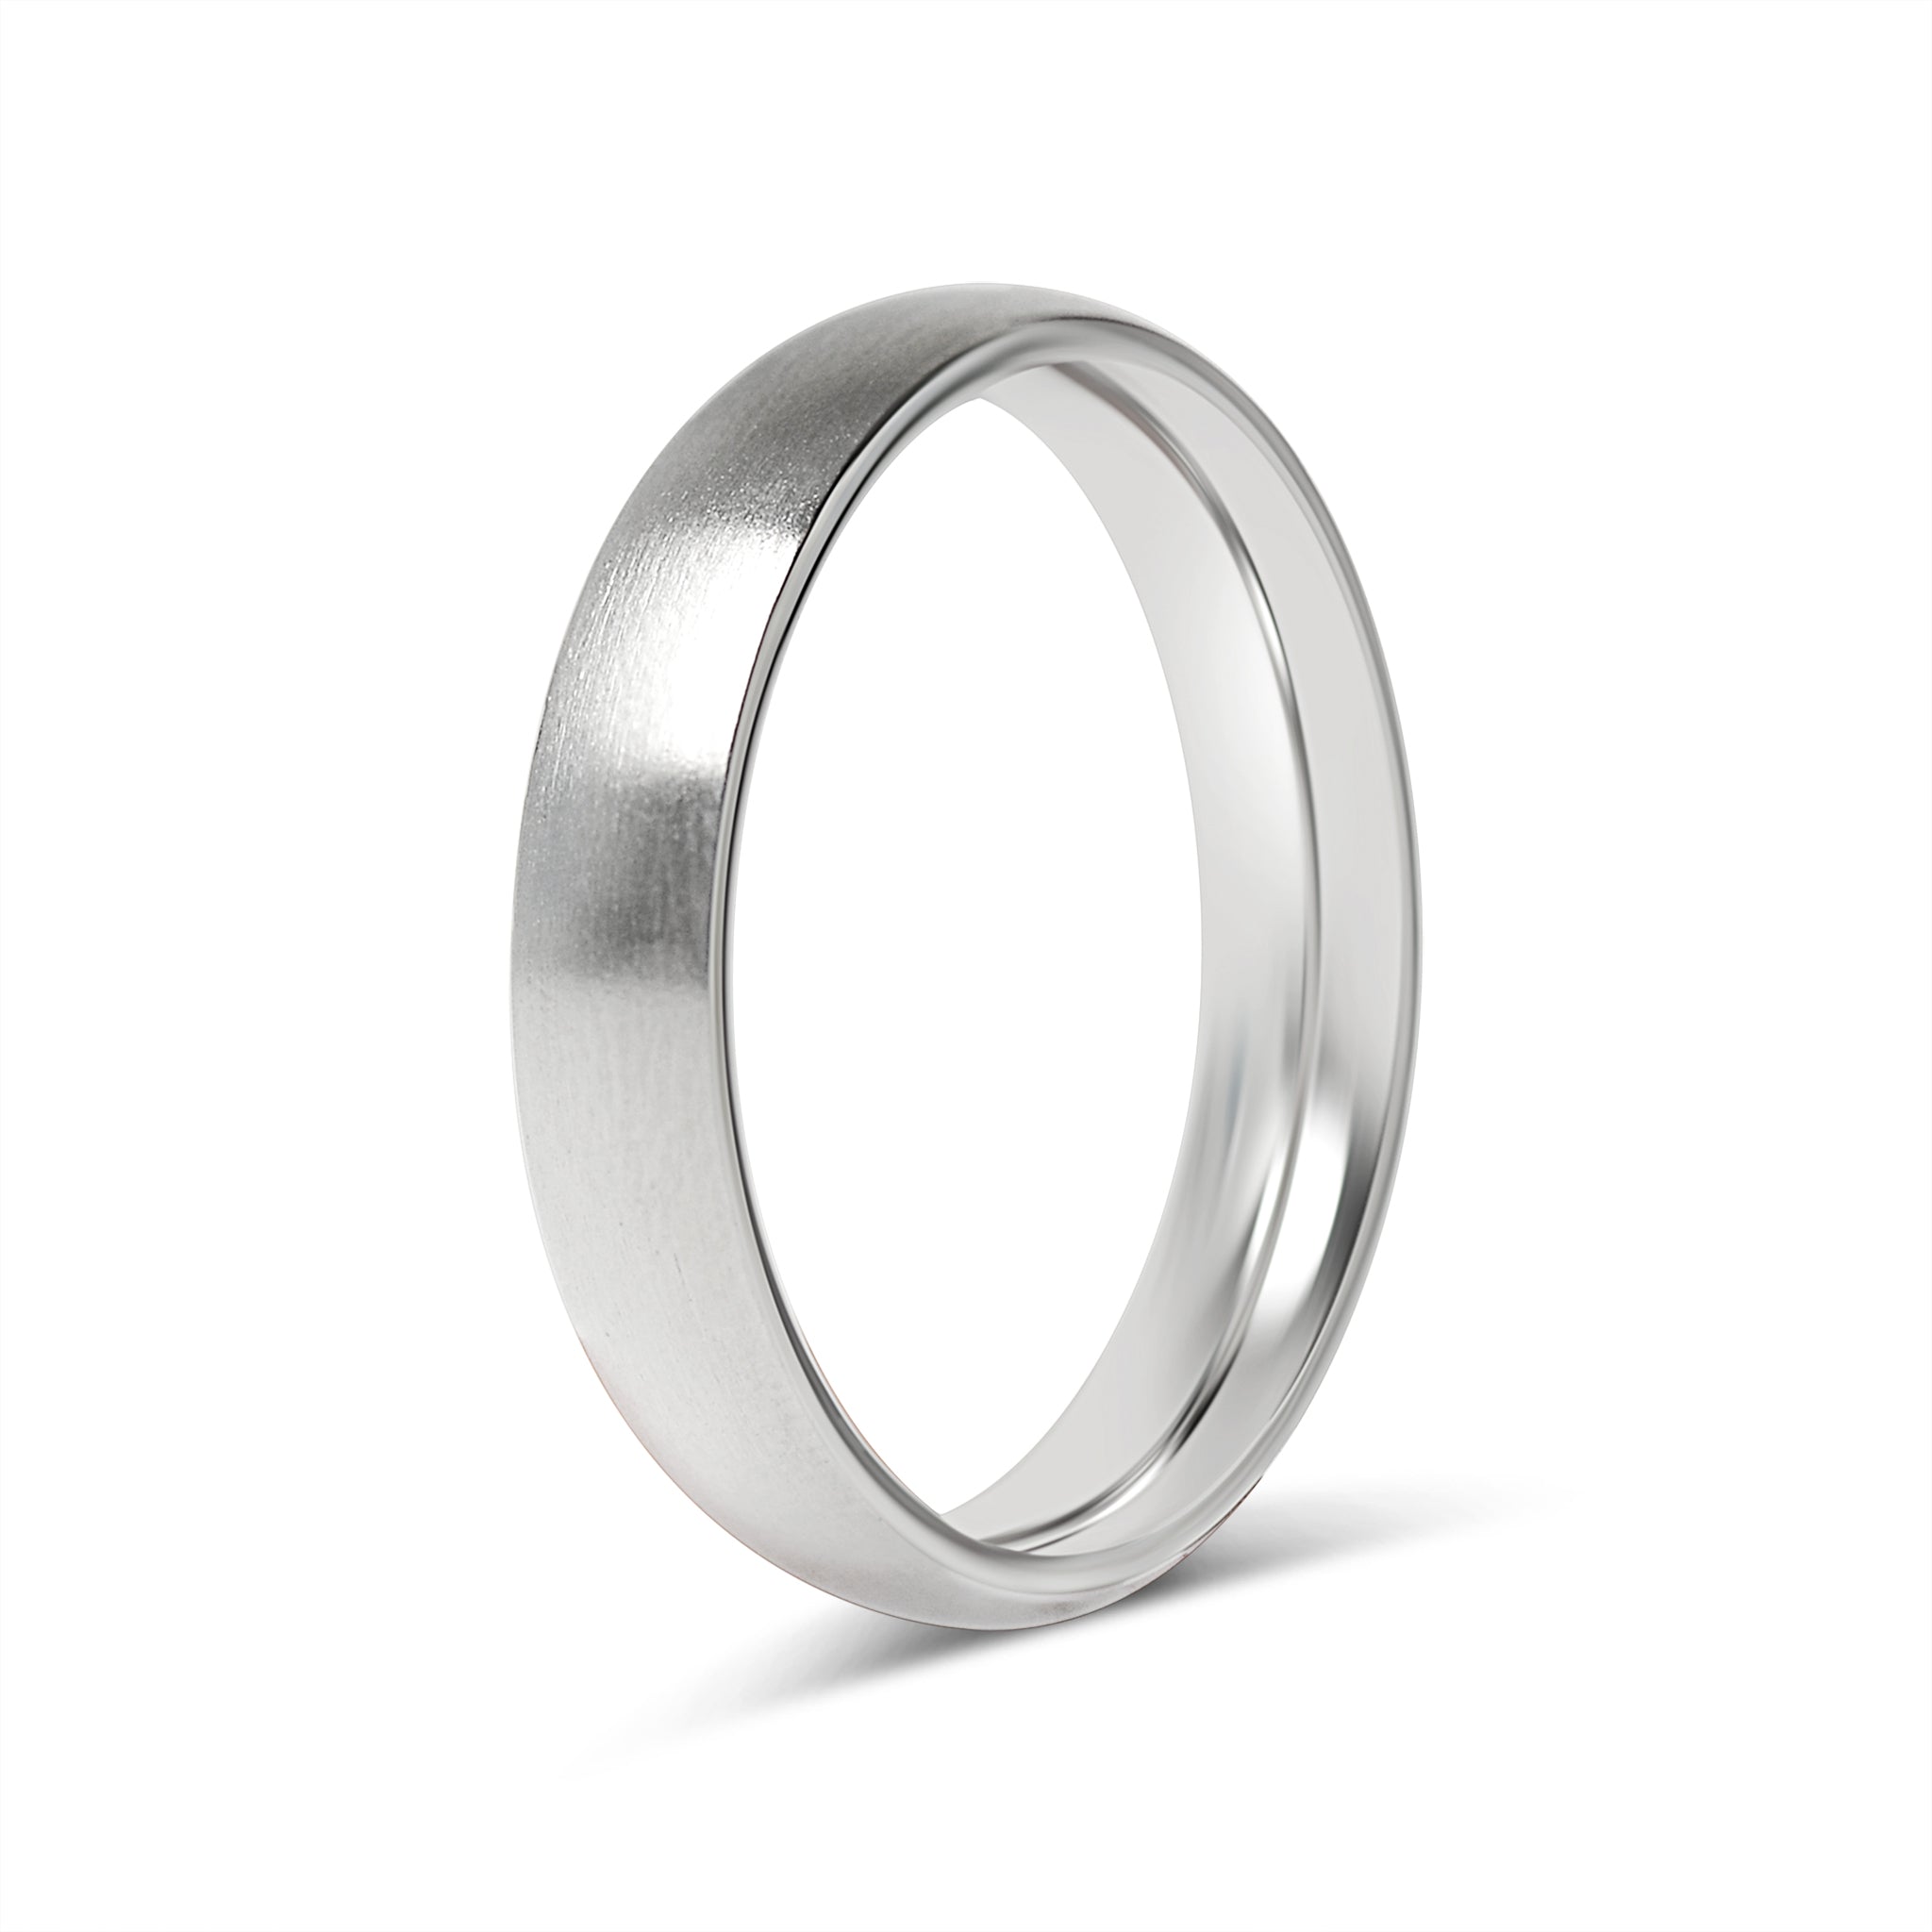 Rings Brushed Stainless Steel Blank Ring Cfr2116 6mm / 14 Wholesale Jewelry Website 14 Unisex